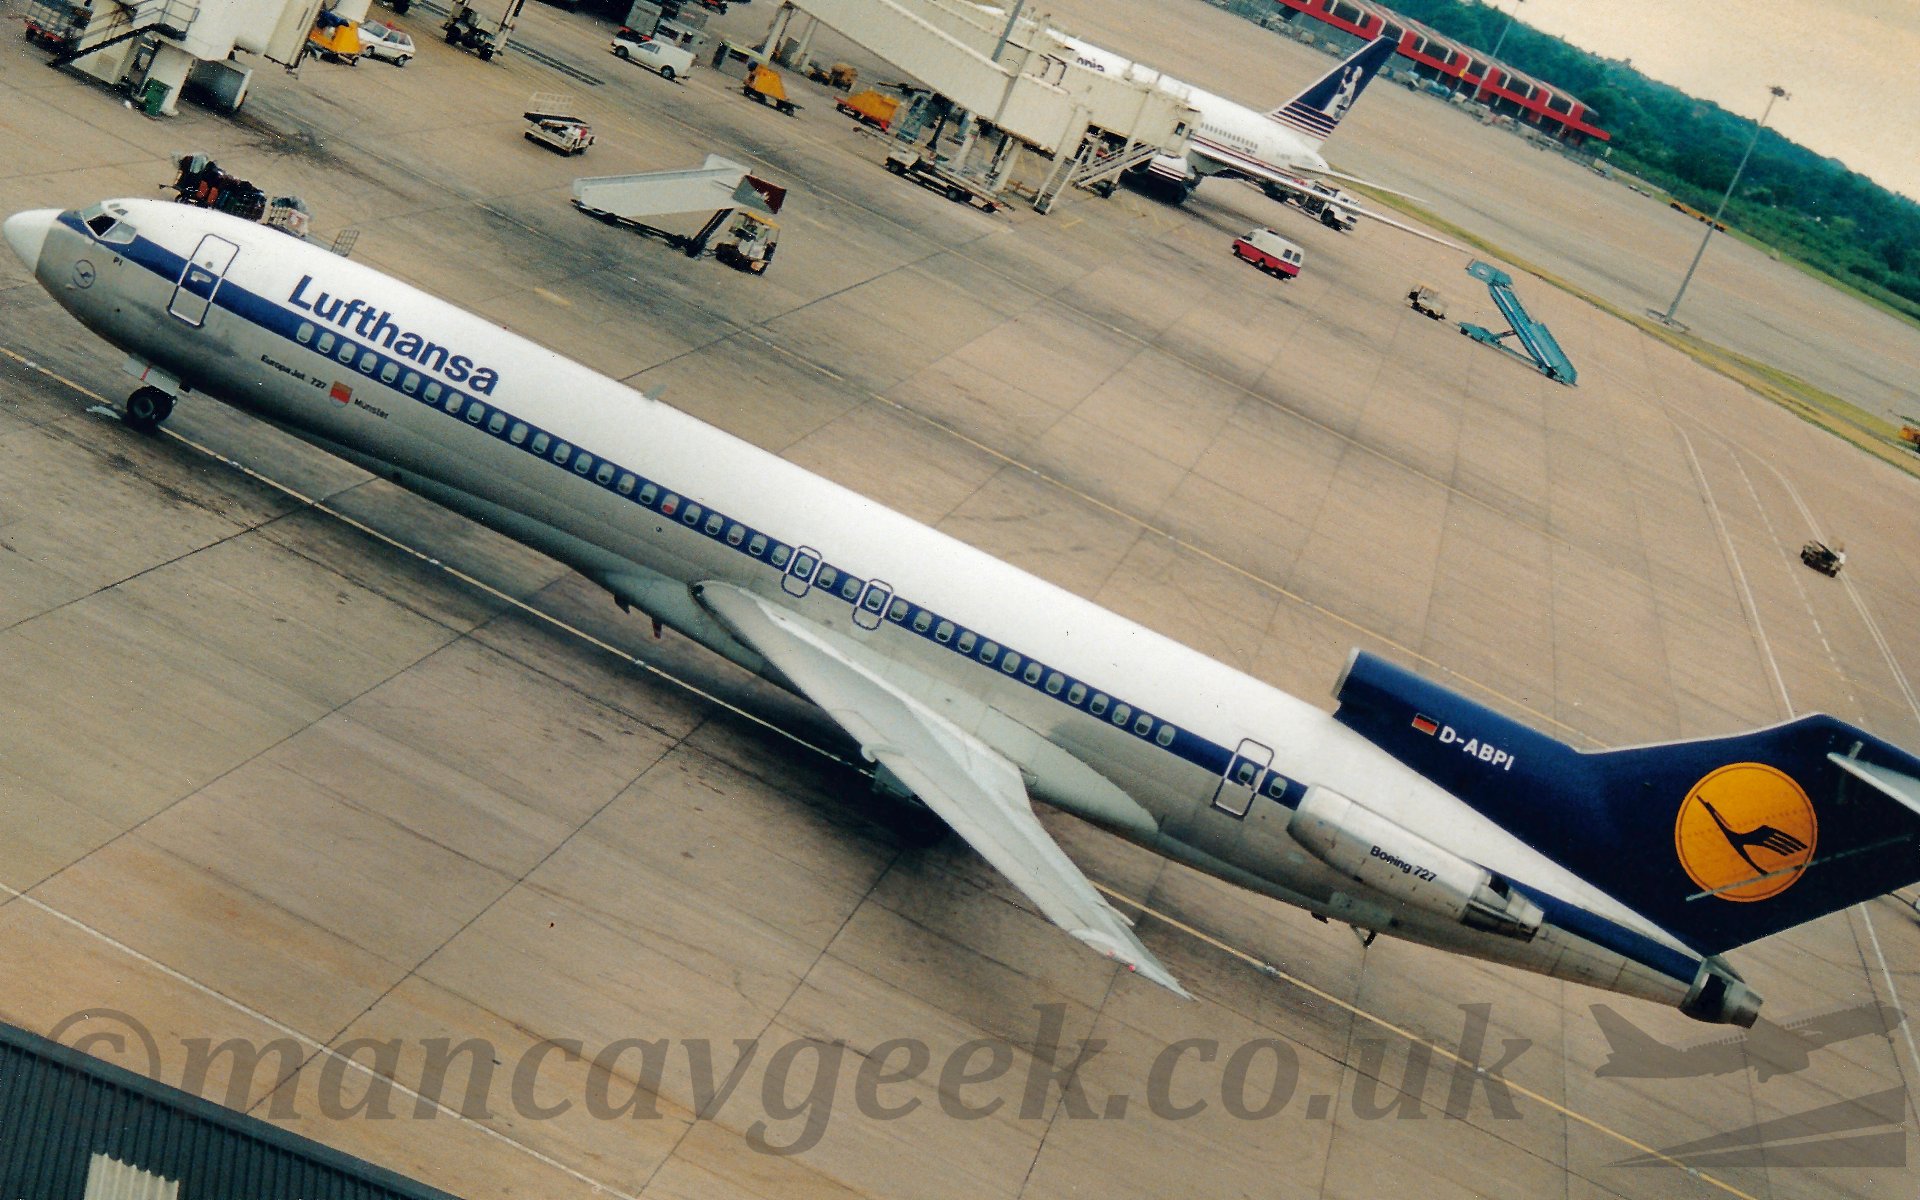 Side view of a 3 engined jet airliner with the engines mounted on the rear fuselage taxiing from right to left, The plane has a white top half and bare metal lower half, seperated by a blue cheatline running over the passenger cabin windows. There are blue "Lufthansa" titles on the upper forward fuselage, and black "Boeing 727" titles on the side mounted engine pods. The tail is a dark blue, with a large yellow circle containing a blue bird with wings outstretched flying from right to left, abnd the registration "D-ADPI" on the centre engine intake. Concrete apron fills most of the rest of the frame, with a couple of white airbridges sticking out, one of which at the top of the frame has a white plane with a blue and white tail attached. In the distance, right at the top of the frame, a red, brown, and white building is at the edge of the apron, with trees behind under a light pink sky.